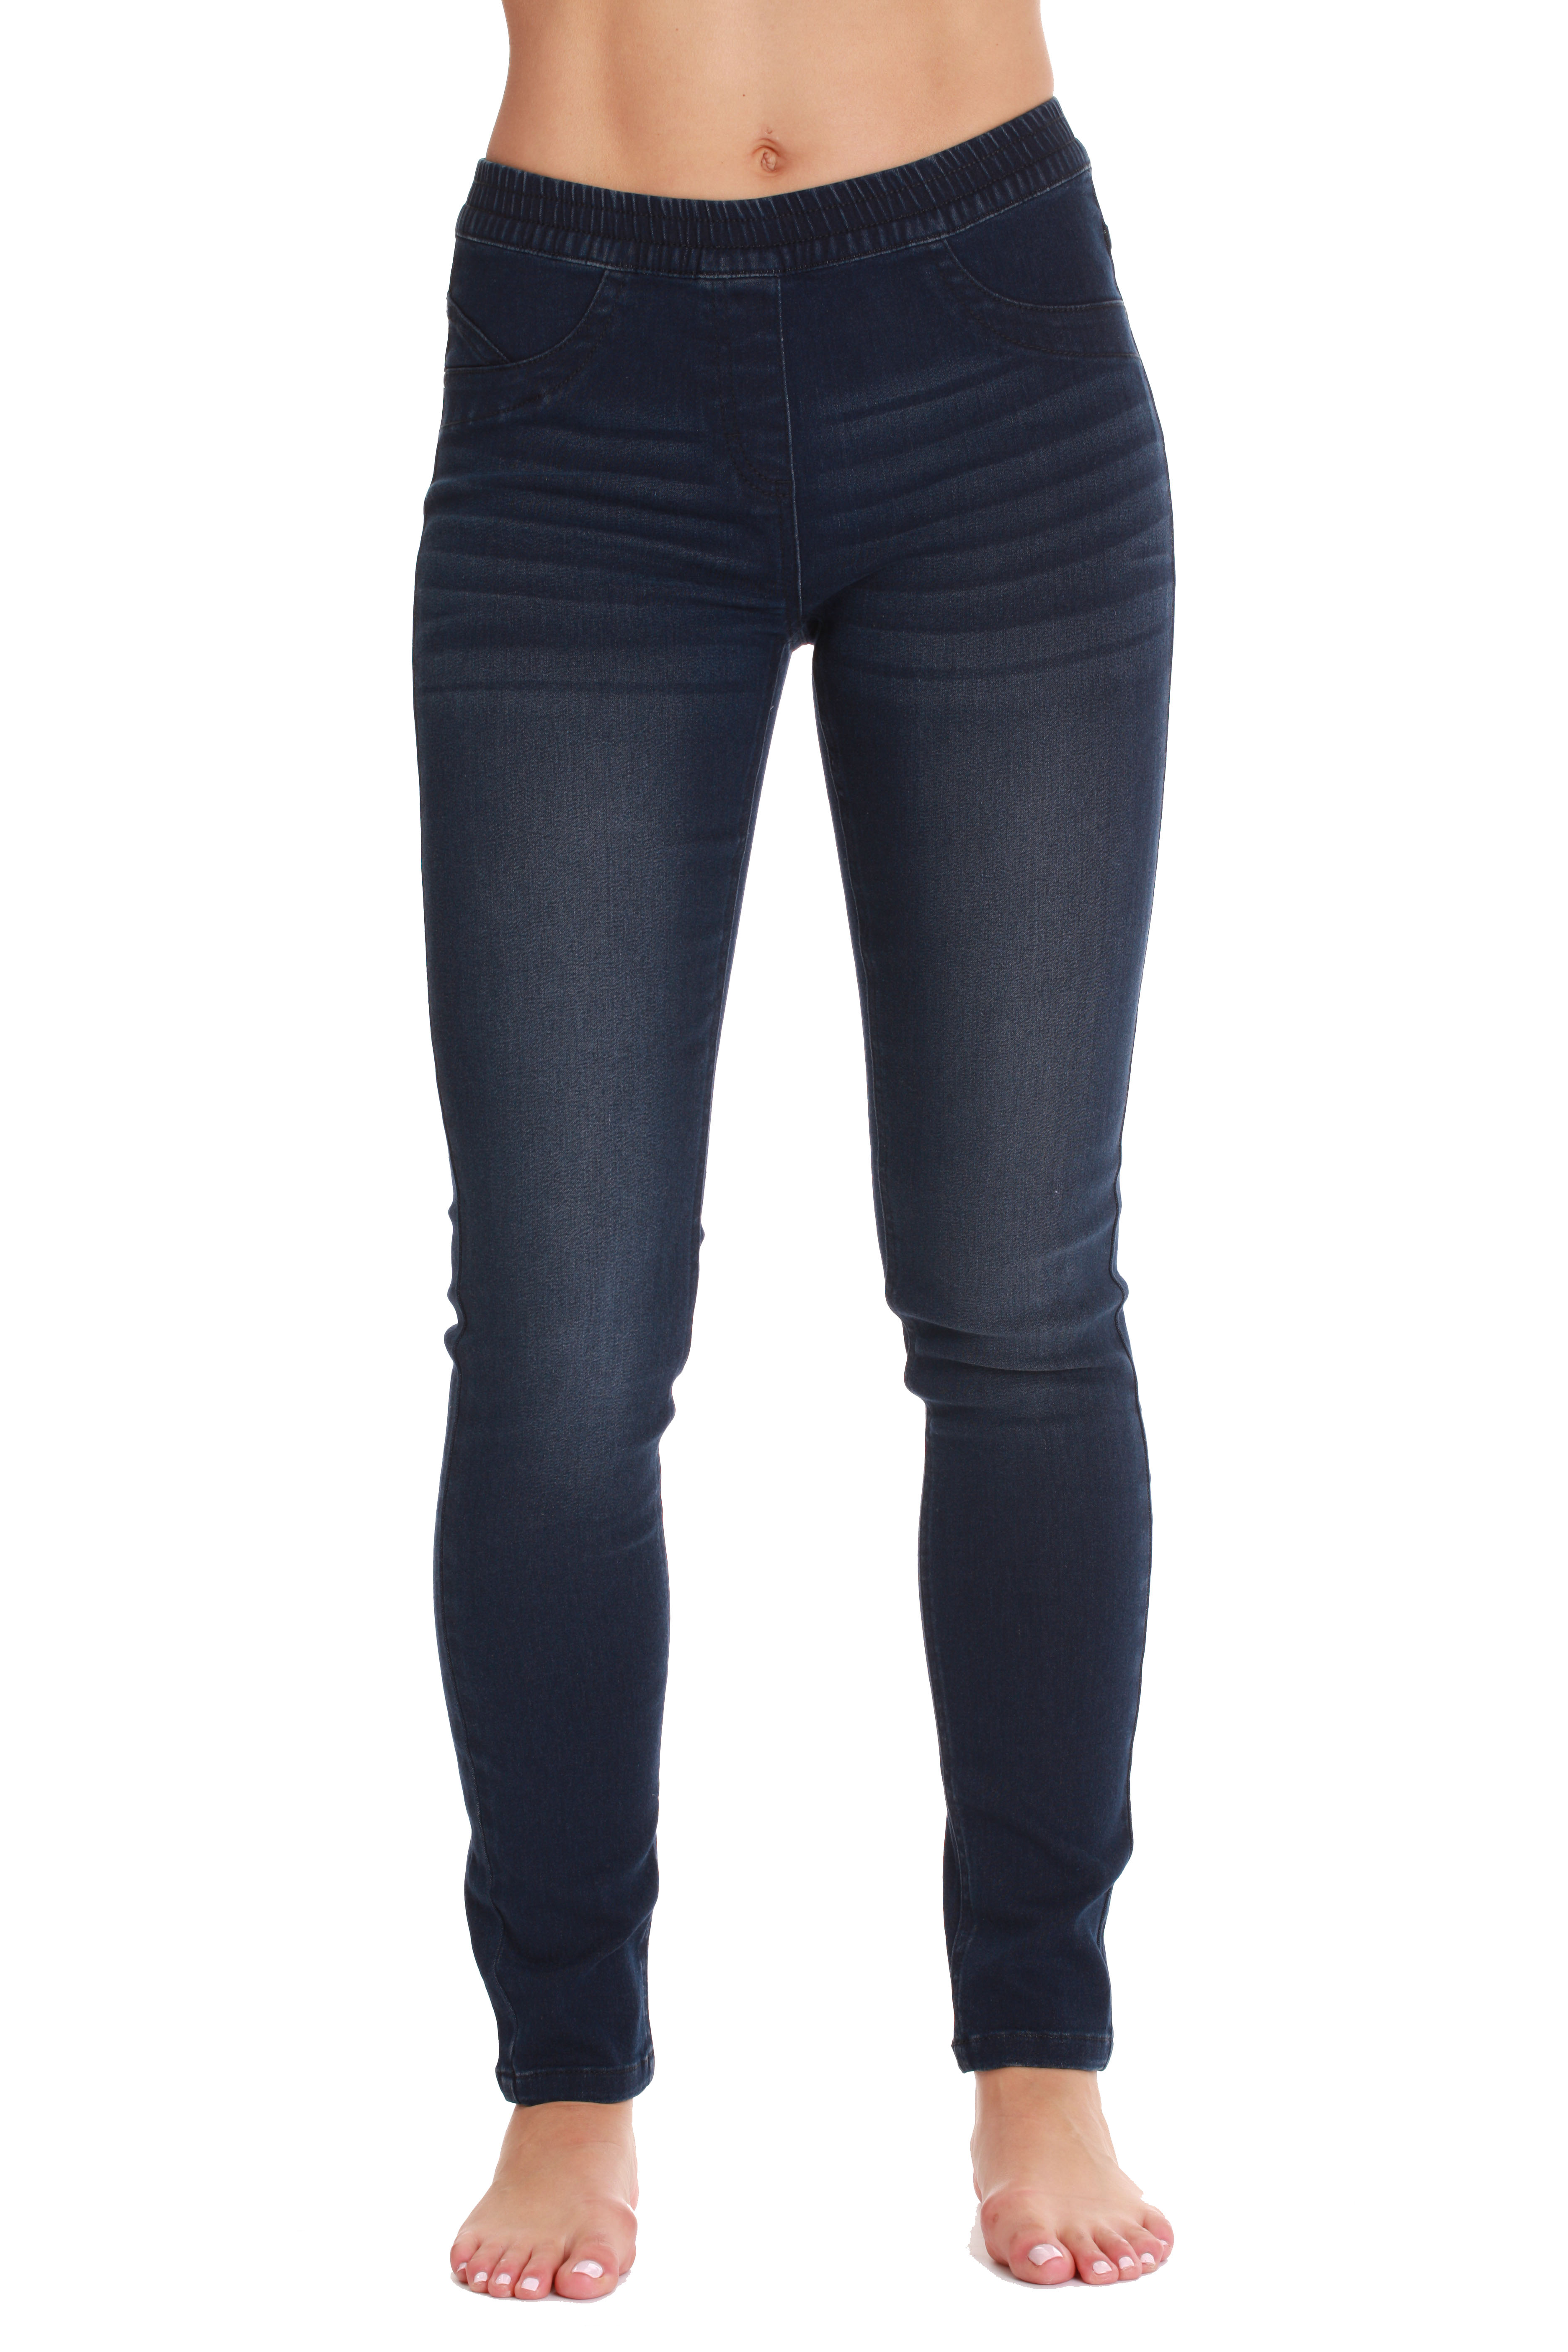 shelikes Womens Jeans Stretch Denim Jeggings With Pockets For Ladies